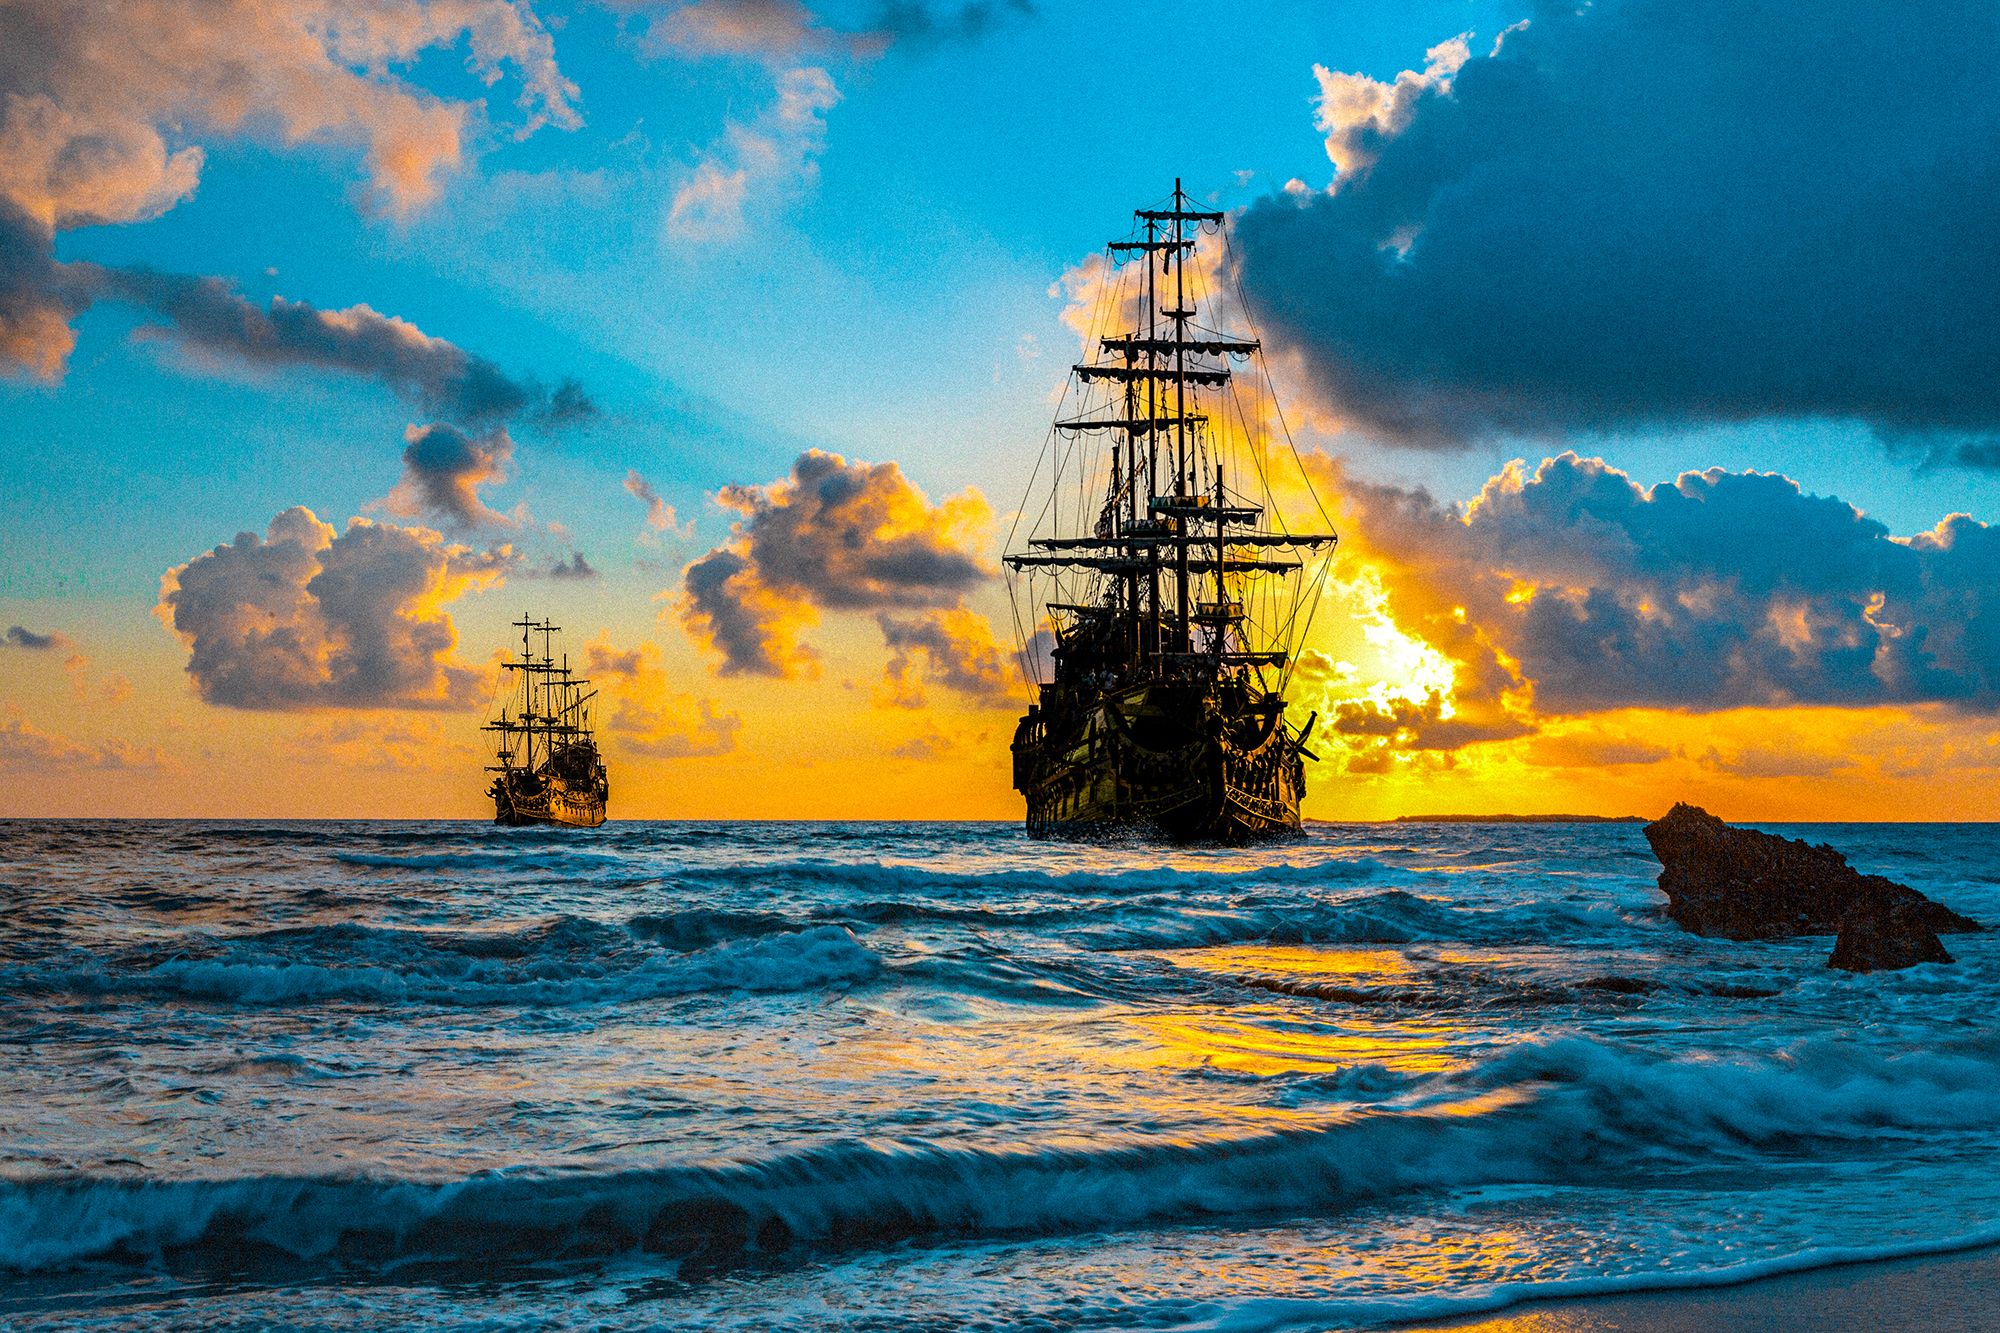 pirates of the caribbean ship